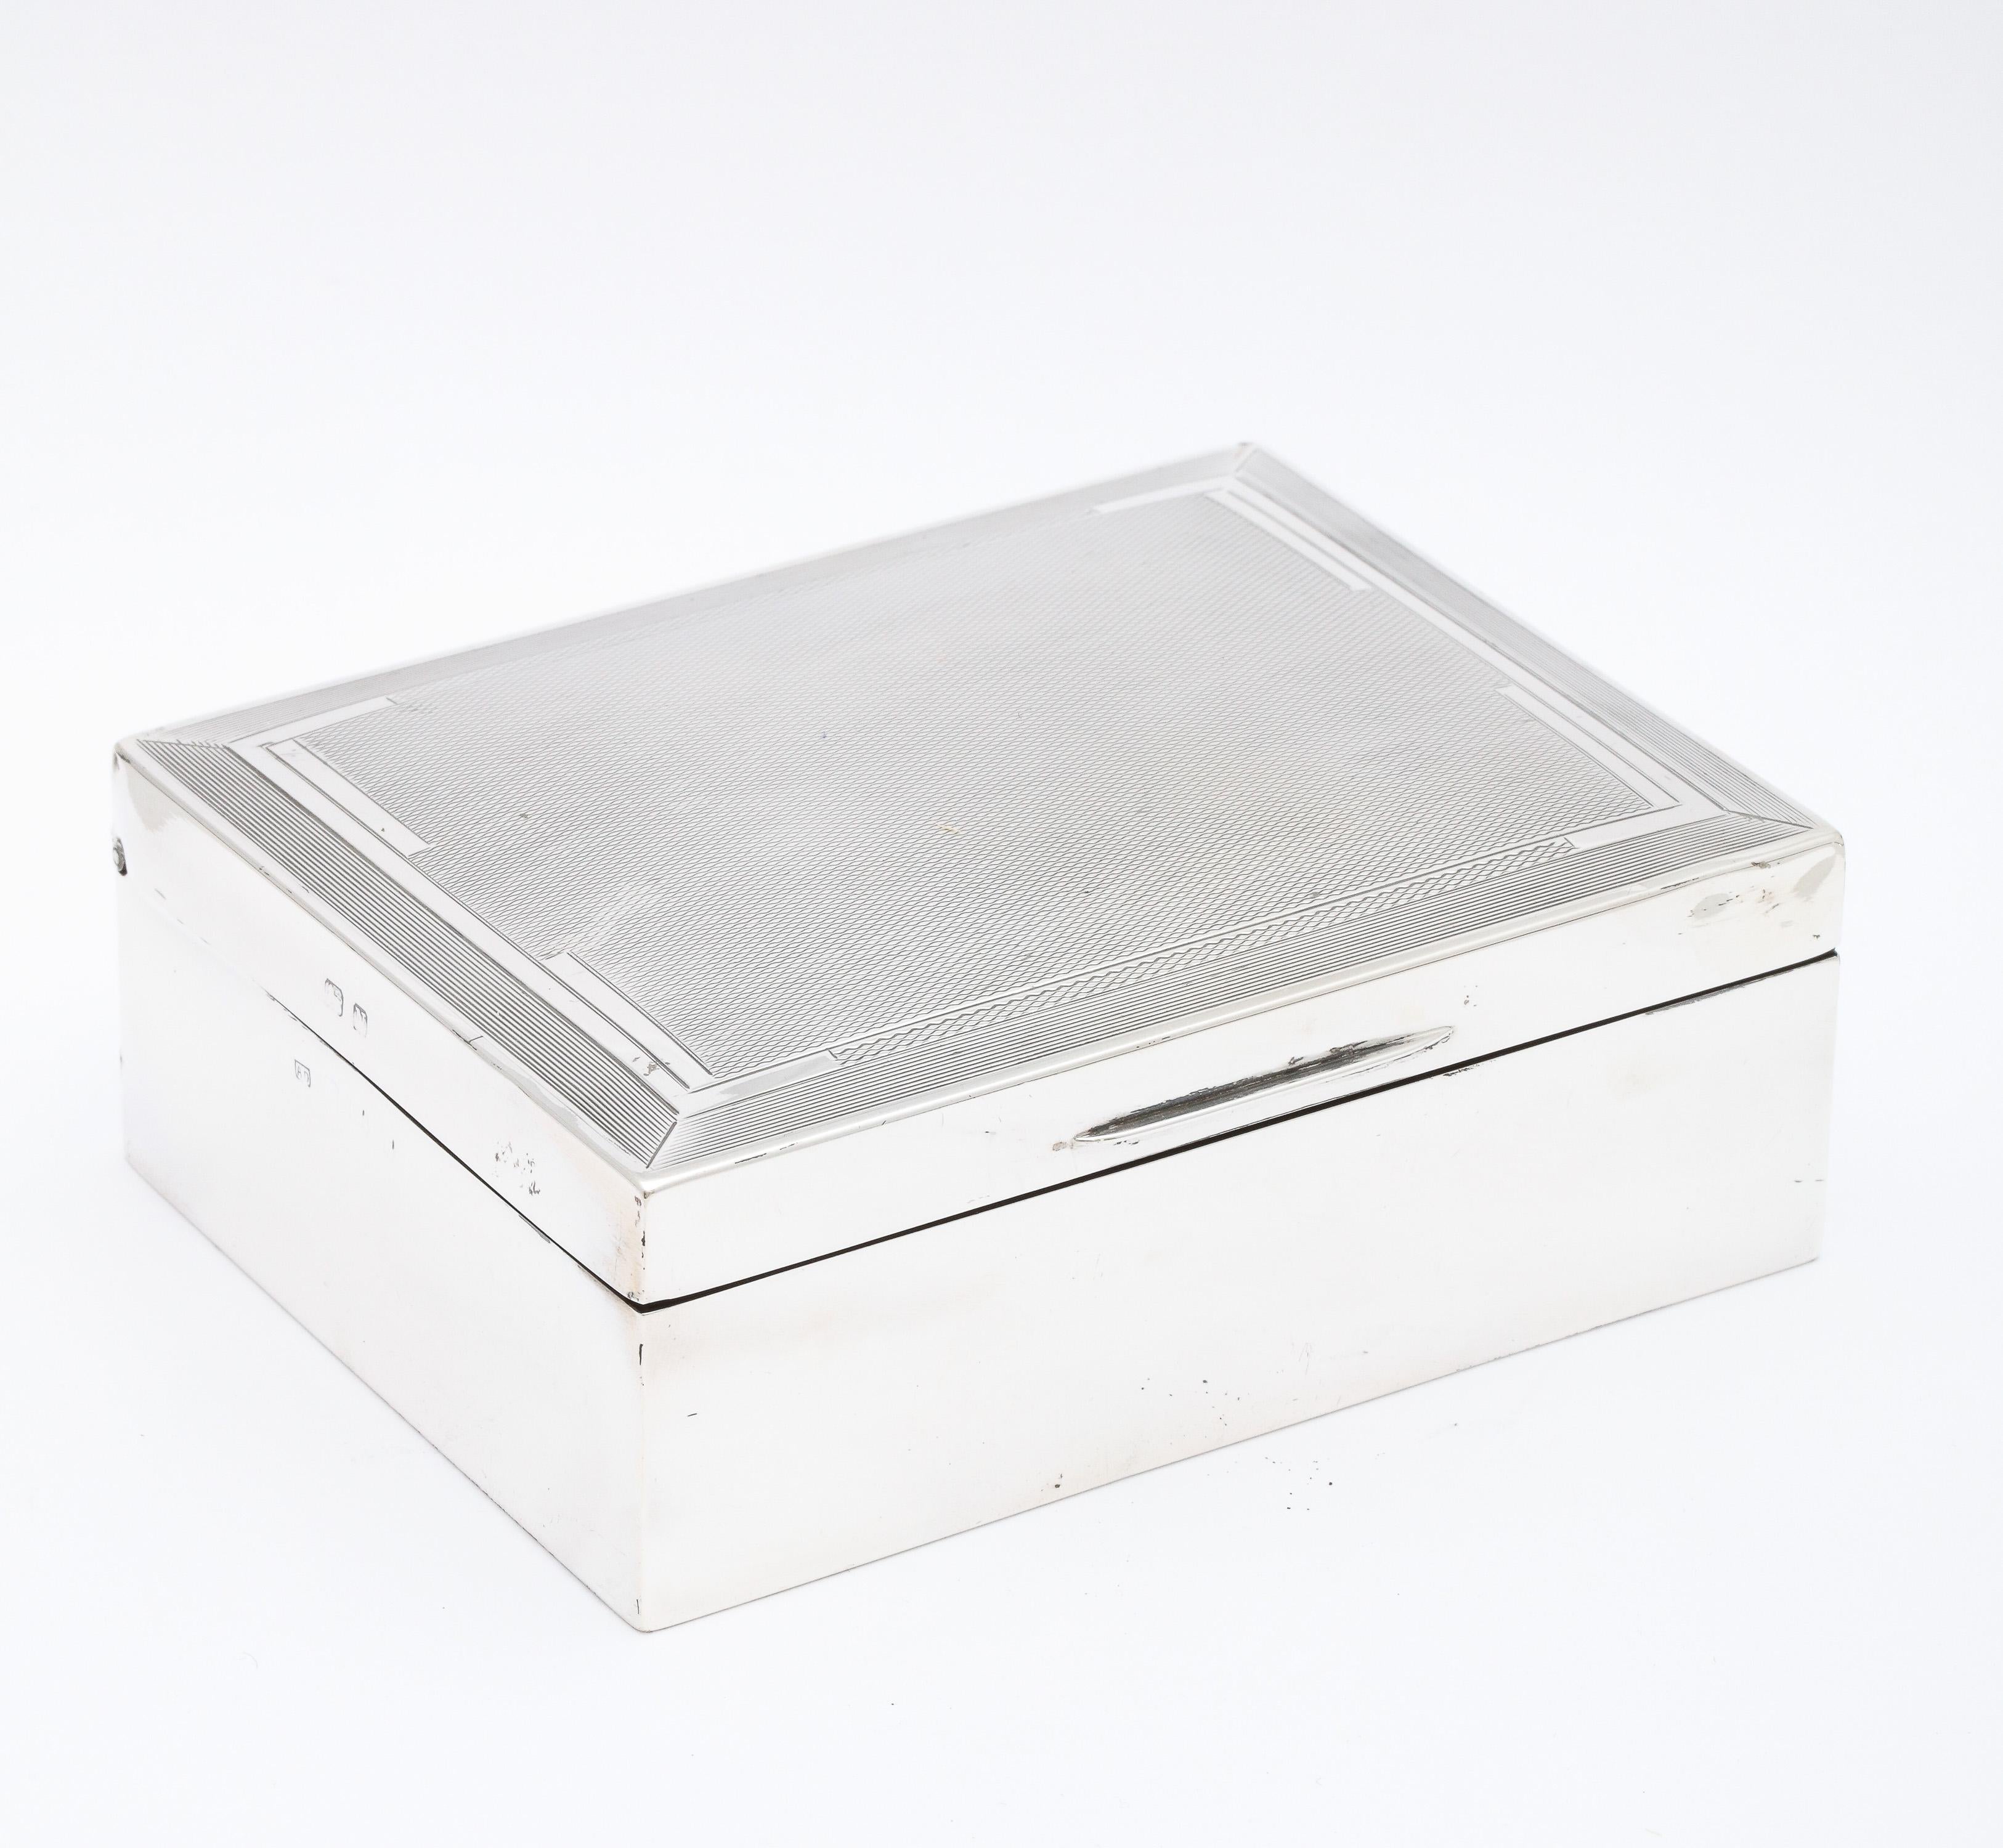 Art Deco period, sterling silver table box with hinged lid and wooden interior, Birmingham, England, year-hallmarked for 1933, Auguste Dreyfus - maker. Lid is engine-turned in design. Measures 4 1/2 inches wide x over 3 1/2 inches deep x over 1 1/2